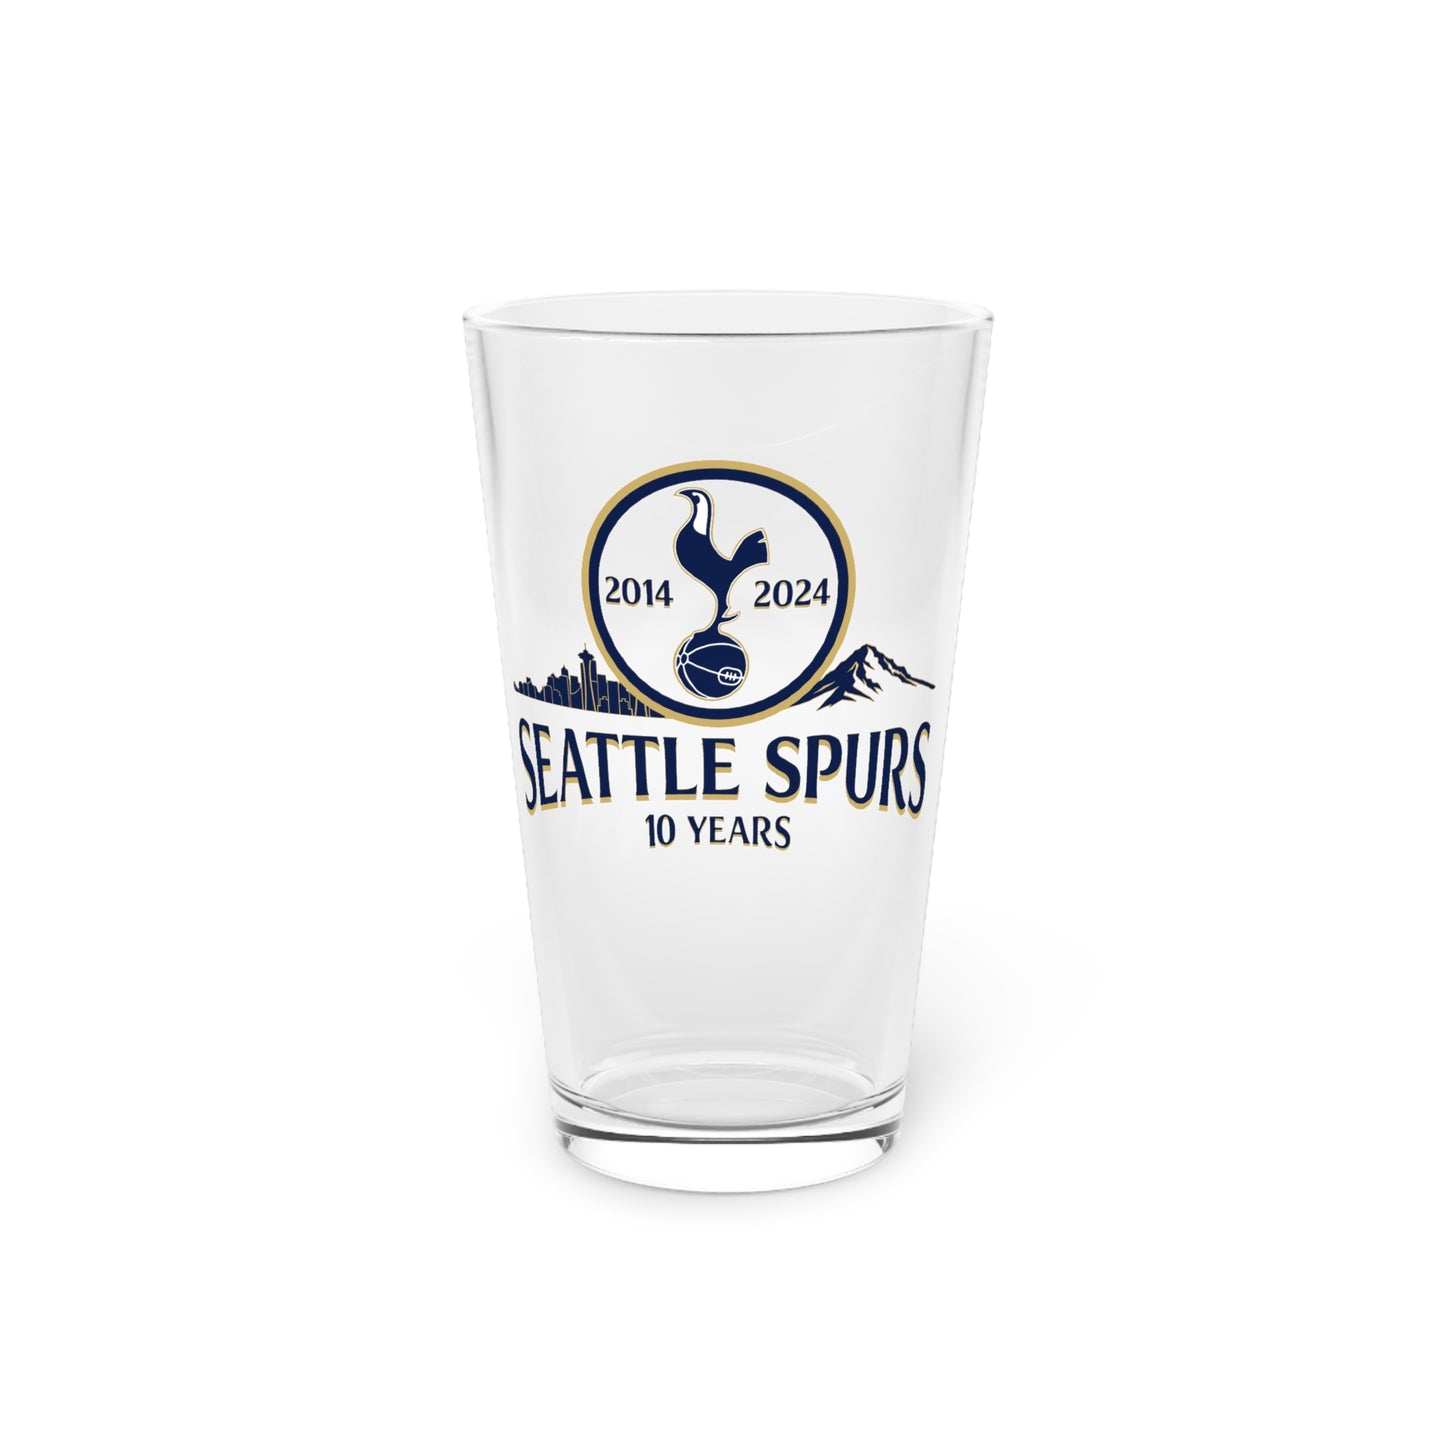 Seattle Spurs 10 Year Anniversary Pint Glass